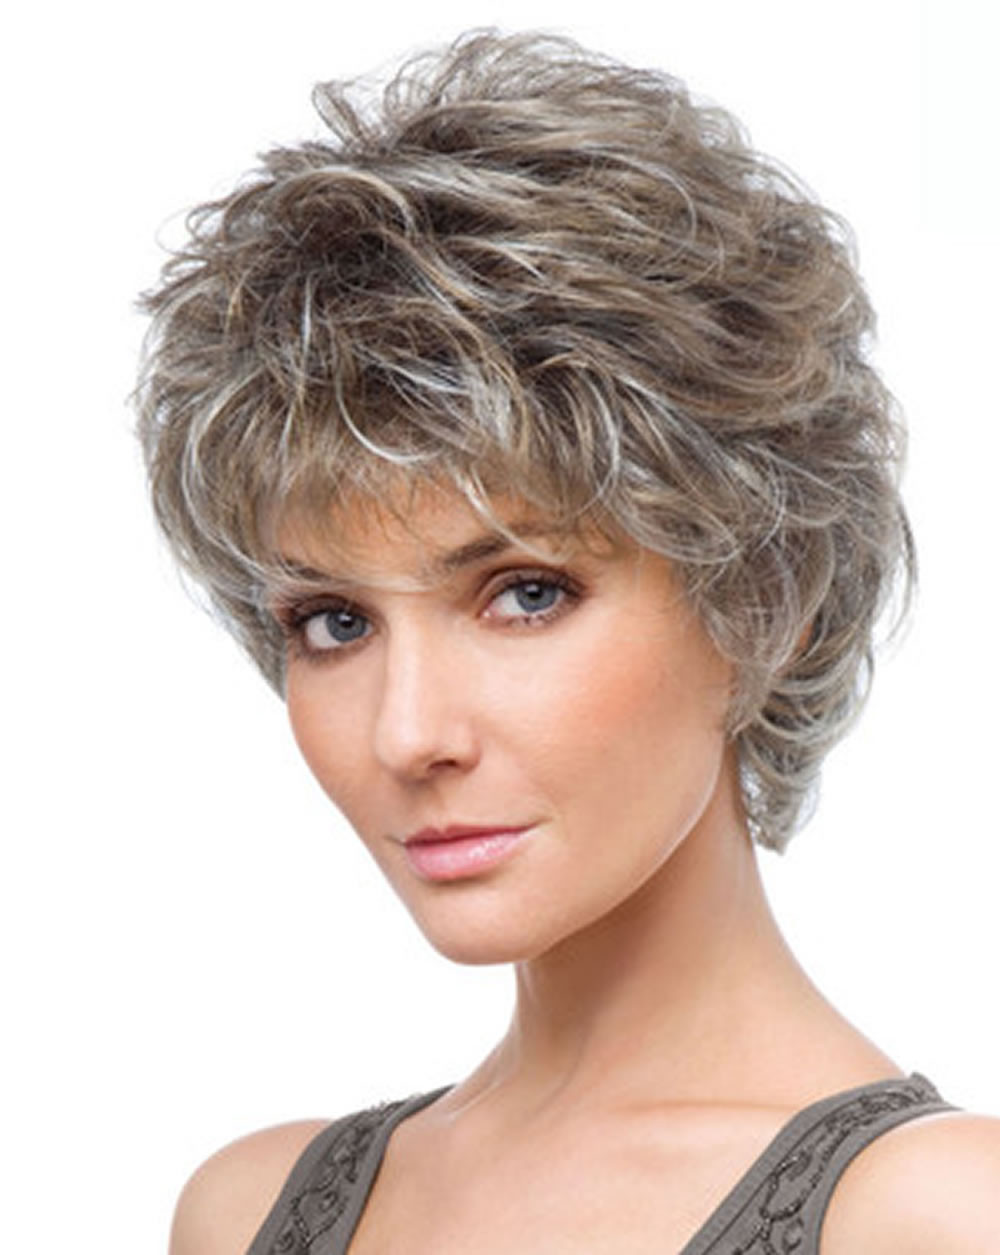 Simple Hairstyles For Women
 30 Easy Short Hairstyles for Older Women – You Should Try